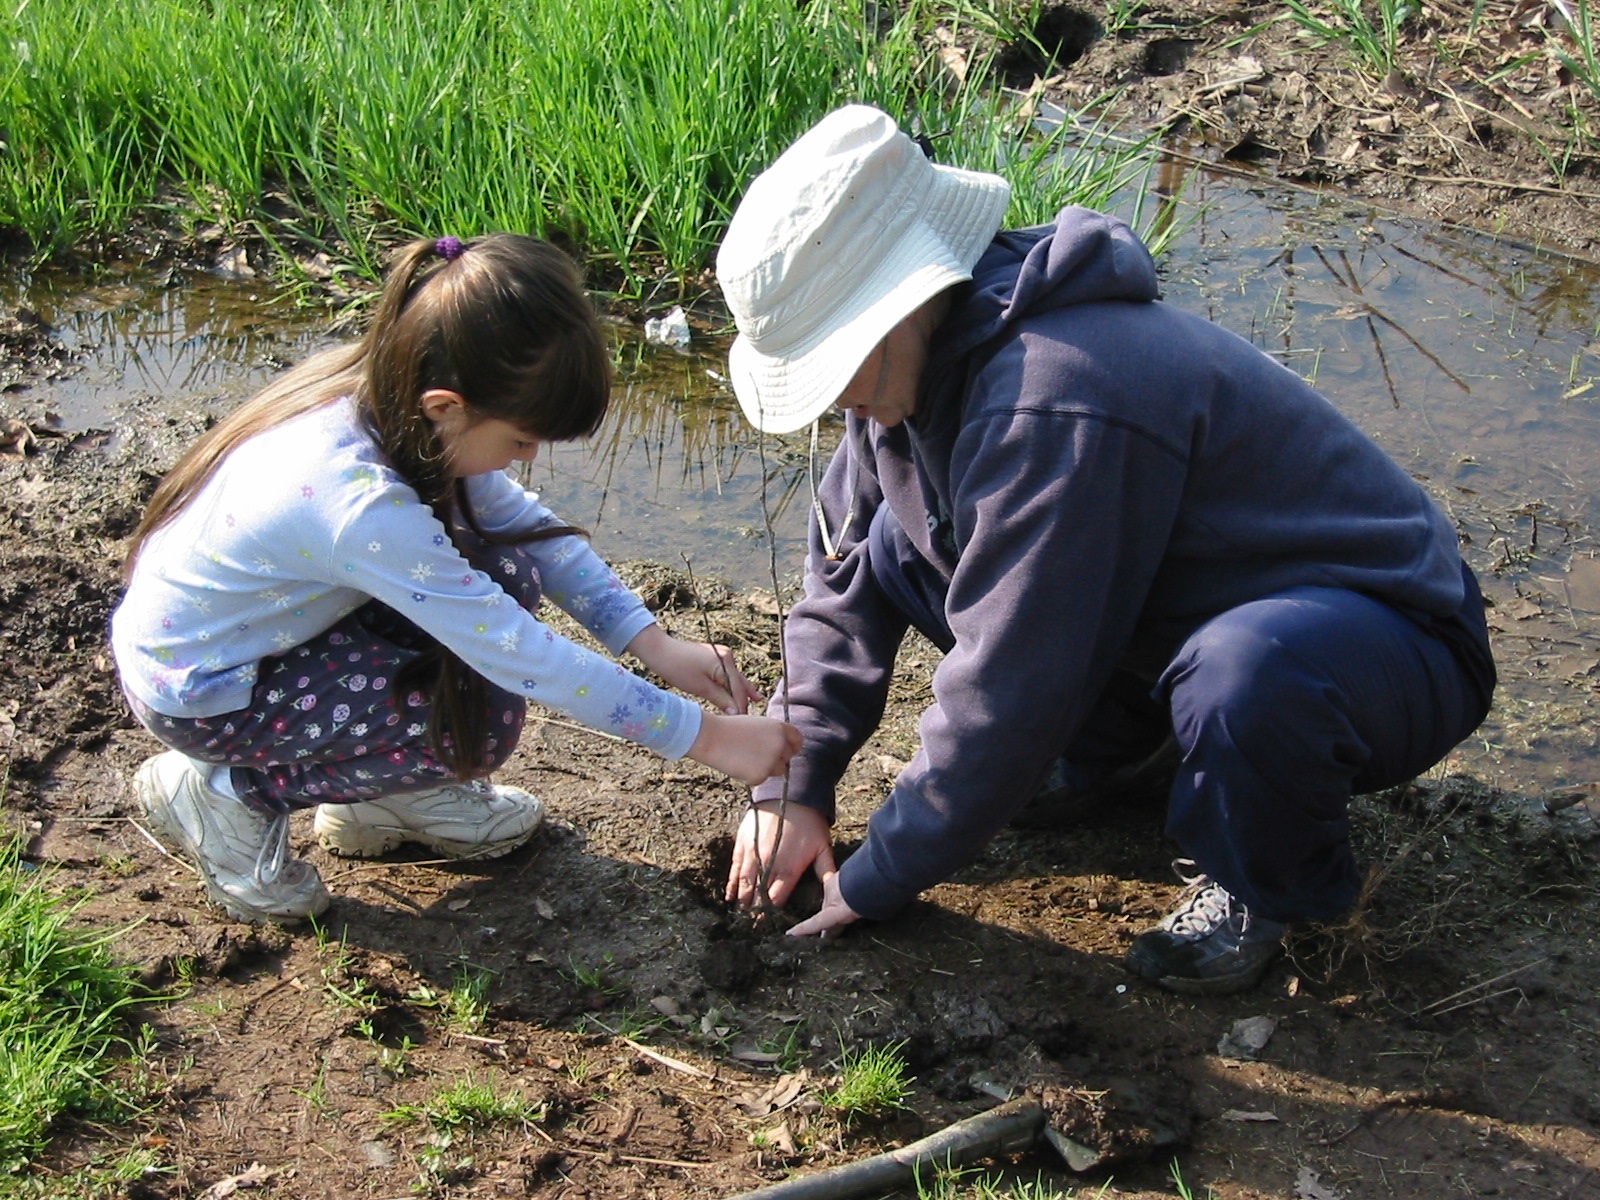 A young girl helps her mom plant a tree next to a stream.